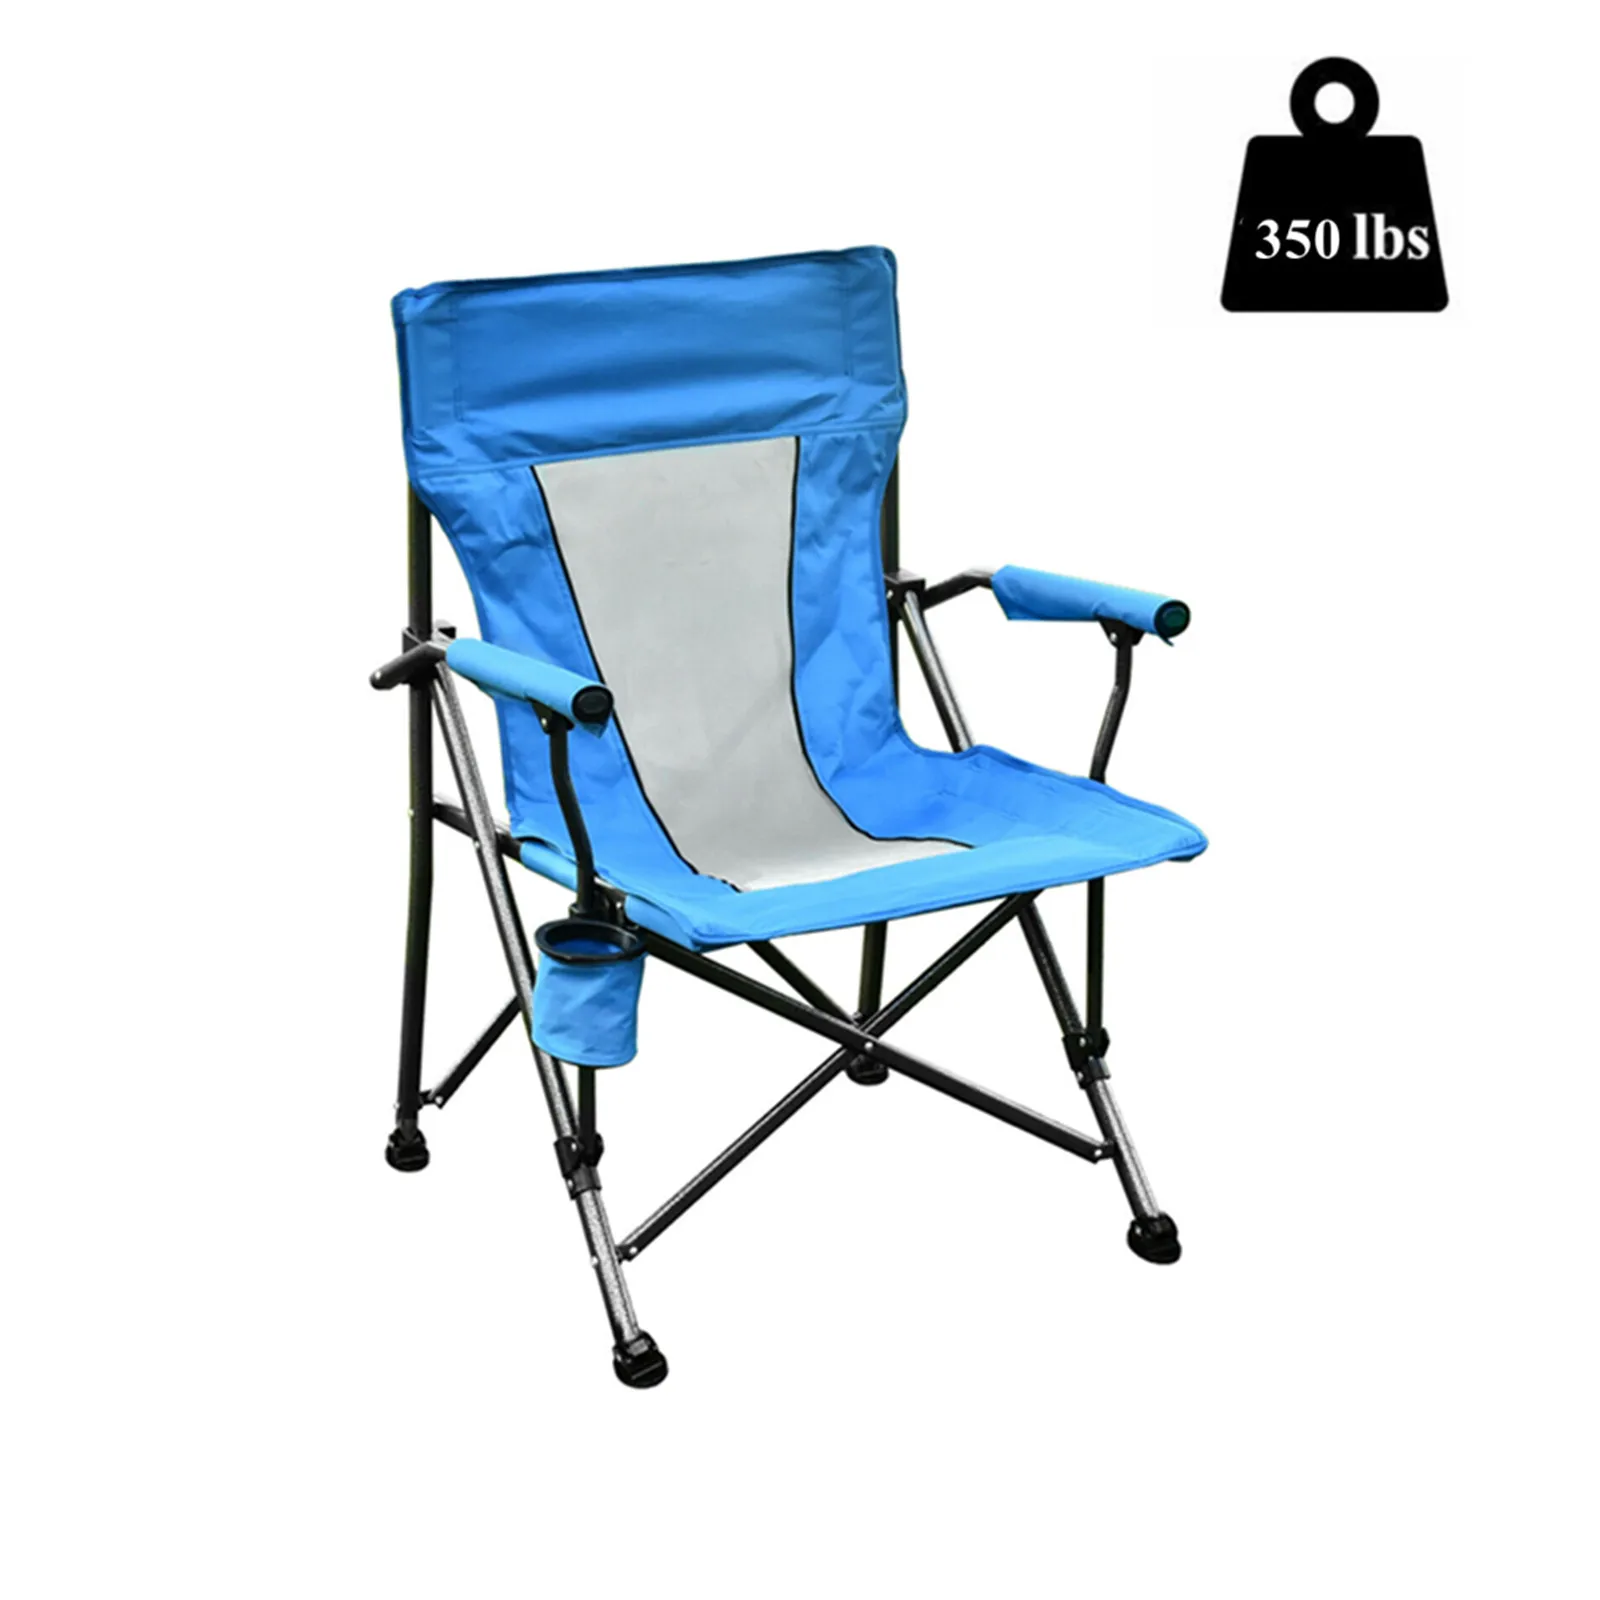 

Portable Folding Chair 600D PVC Camping Chair Intensify Steel Frame Load-Bearing 350 Lbs with Cup Holder&Cushion[US-Stock]